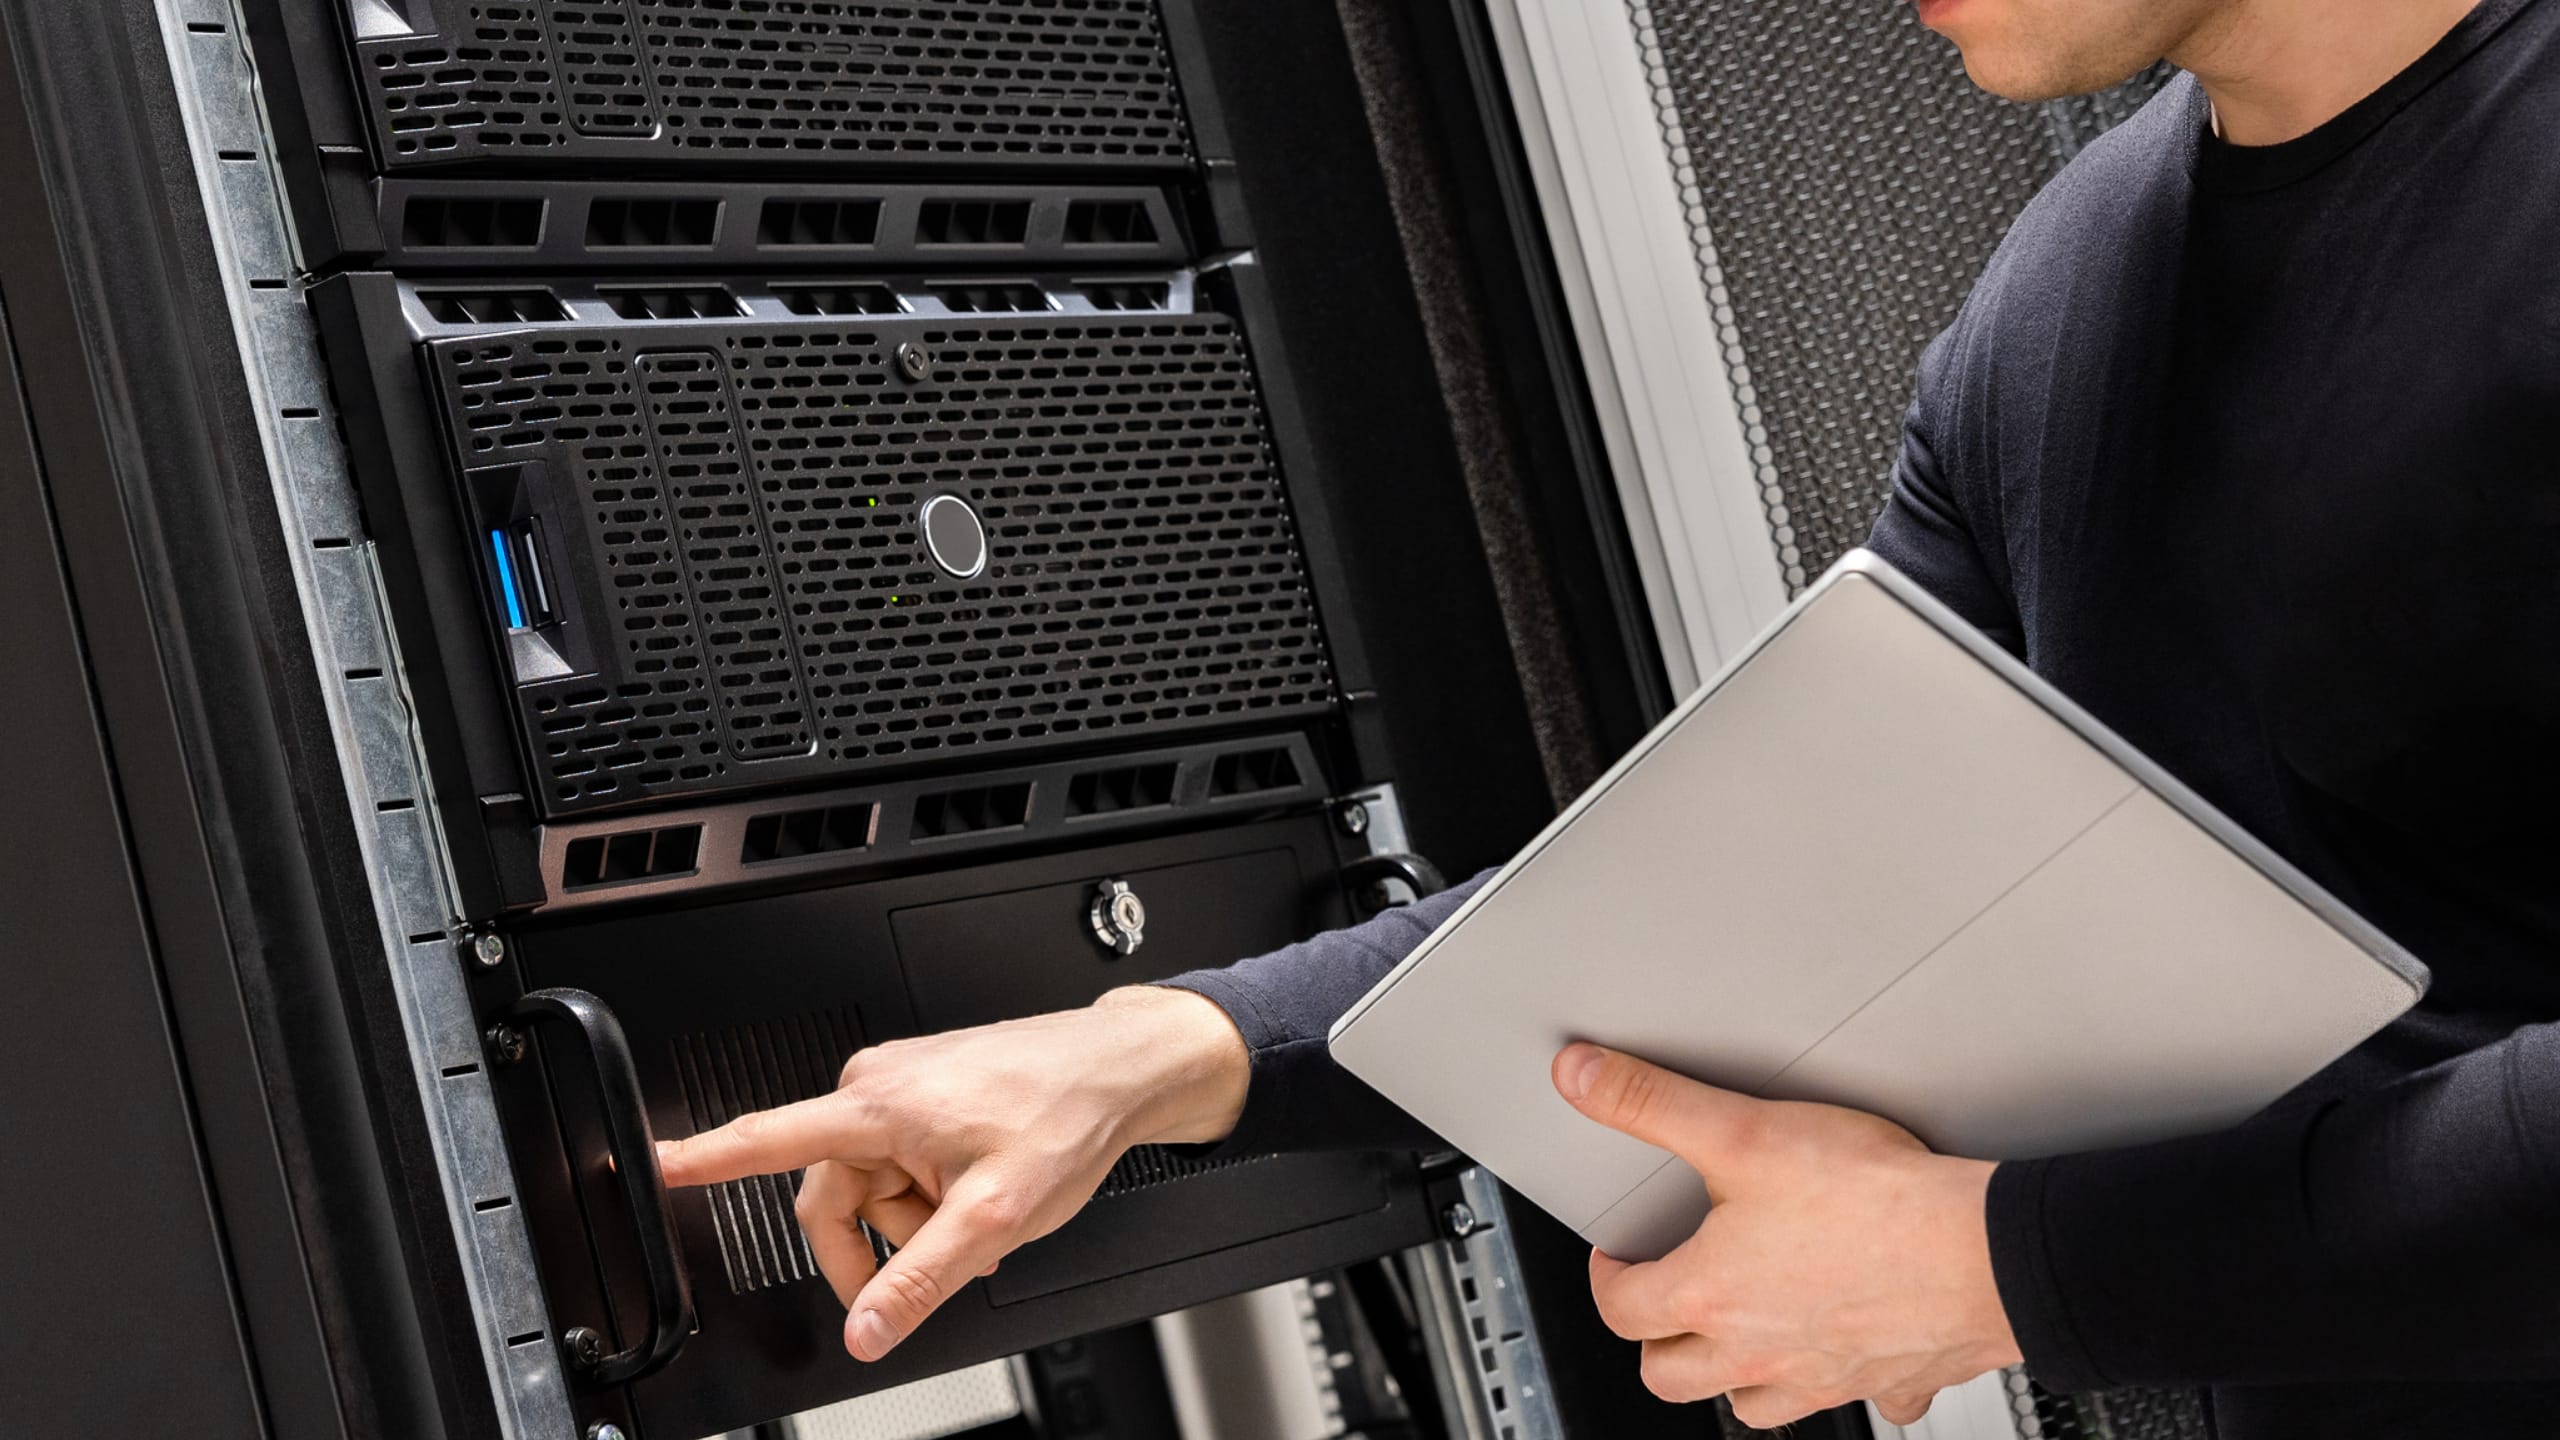 Find Out How to Streamline Your IT Operations With a Managed Network Service